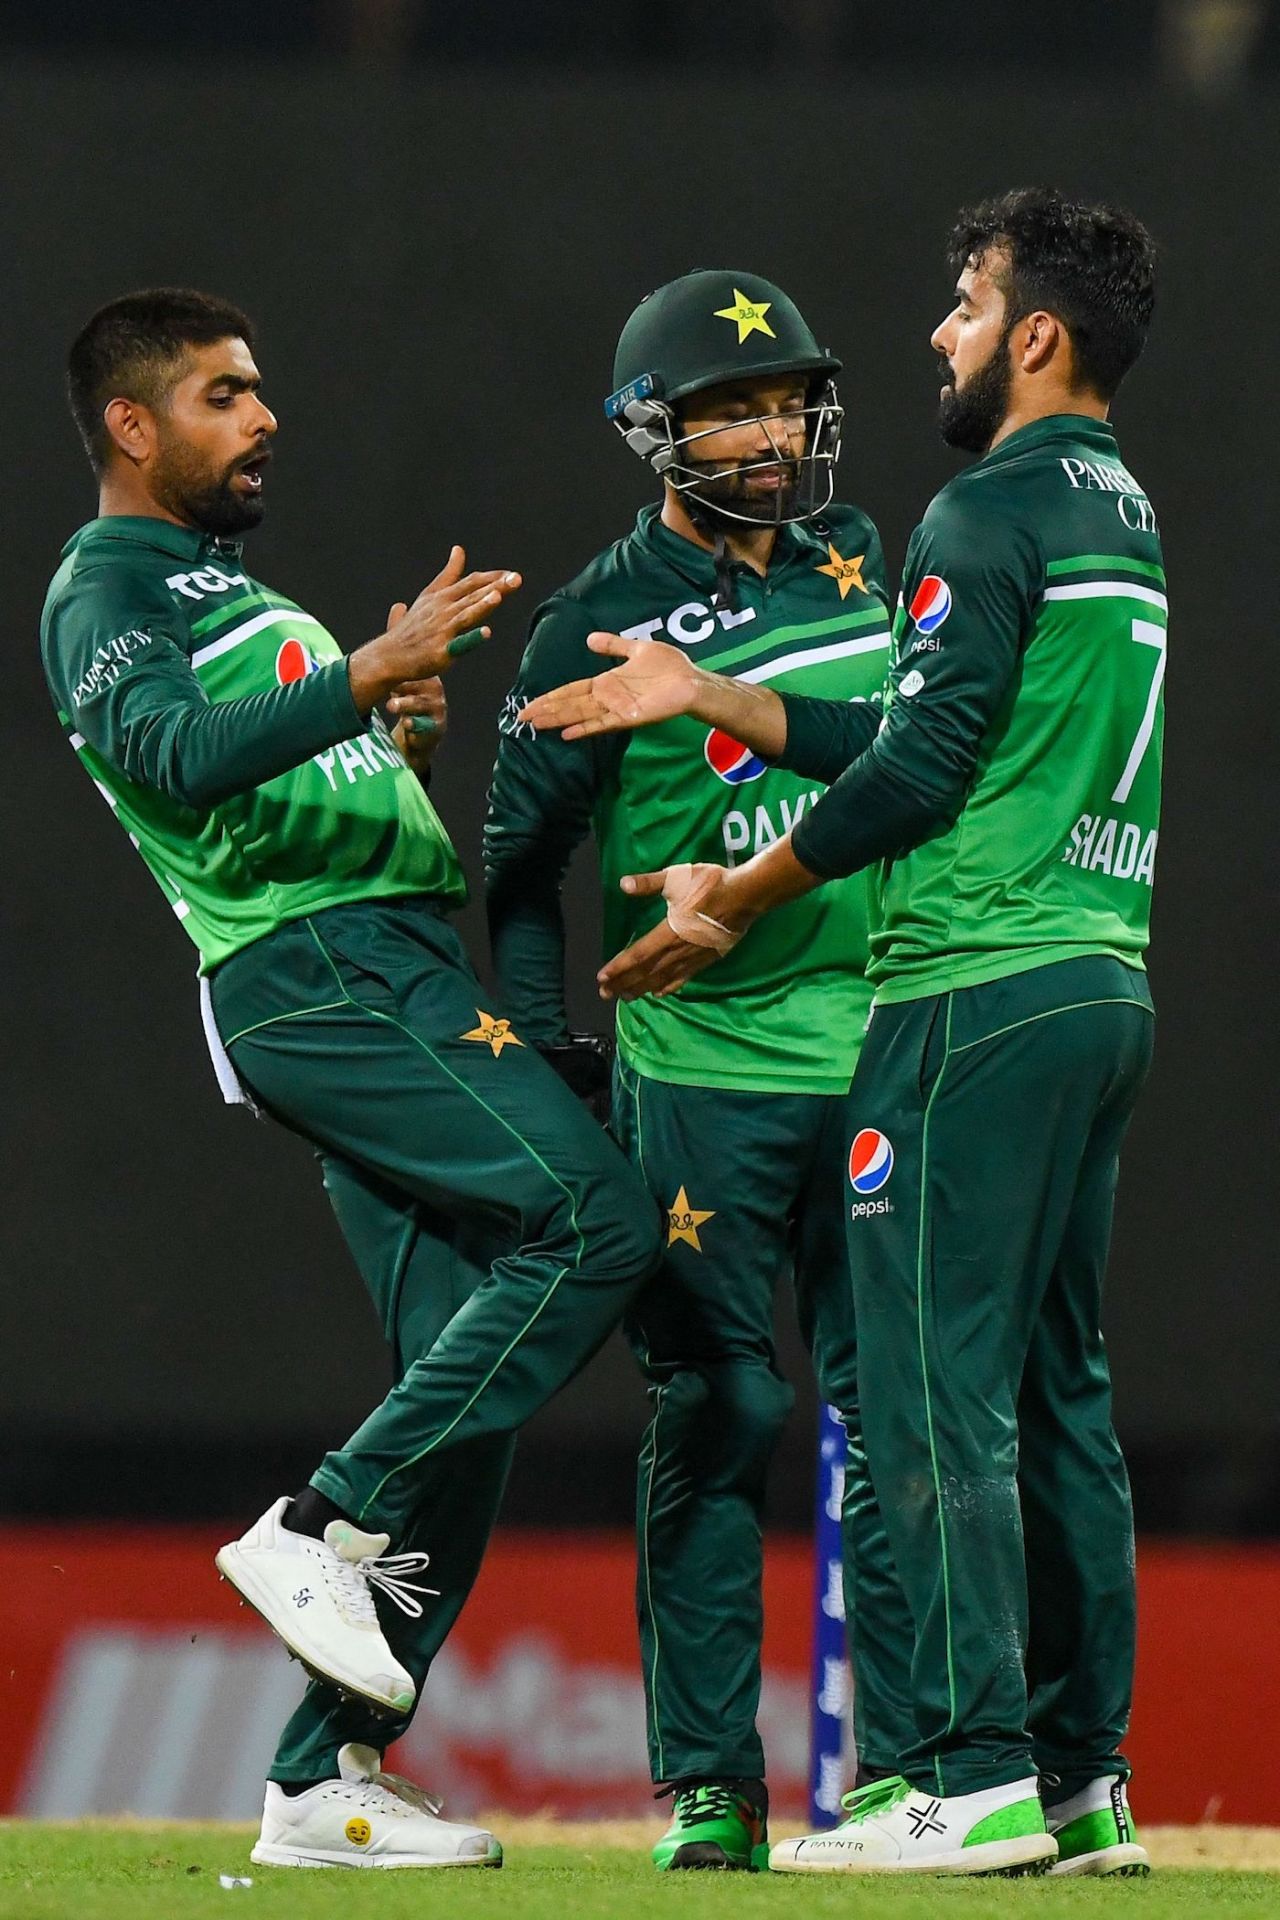 Shadab Khan struck twice in the 21st over, Afghanistan vs Pakistan, 3rd ODI, Colombo, August 26, 2023